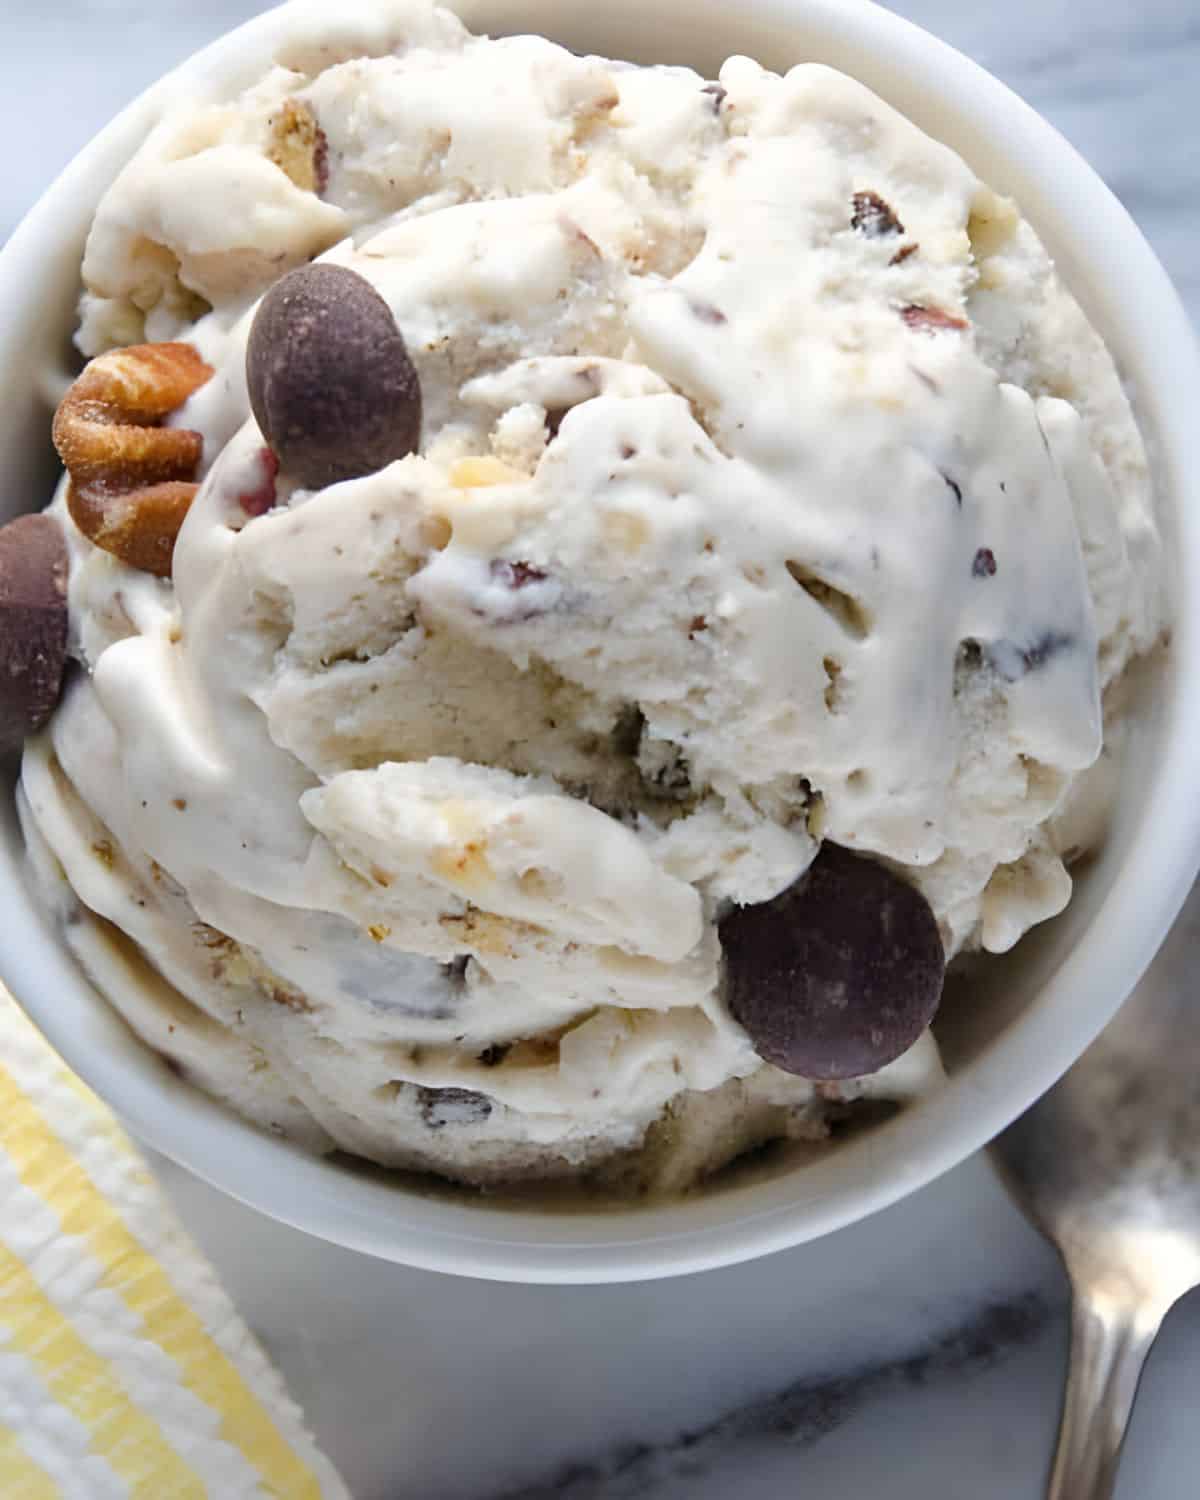 A dish of banana ice cream with chocolate chips.